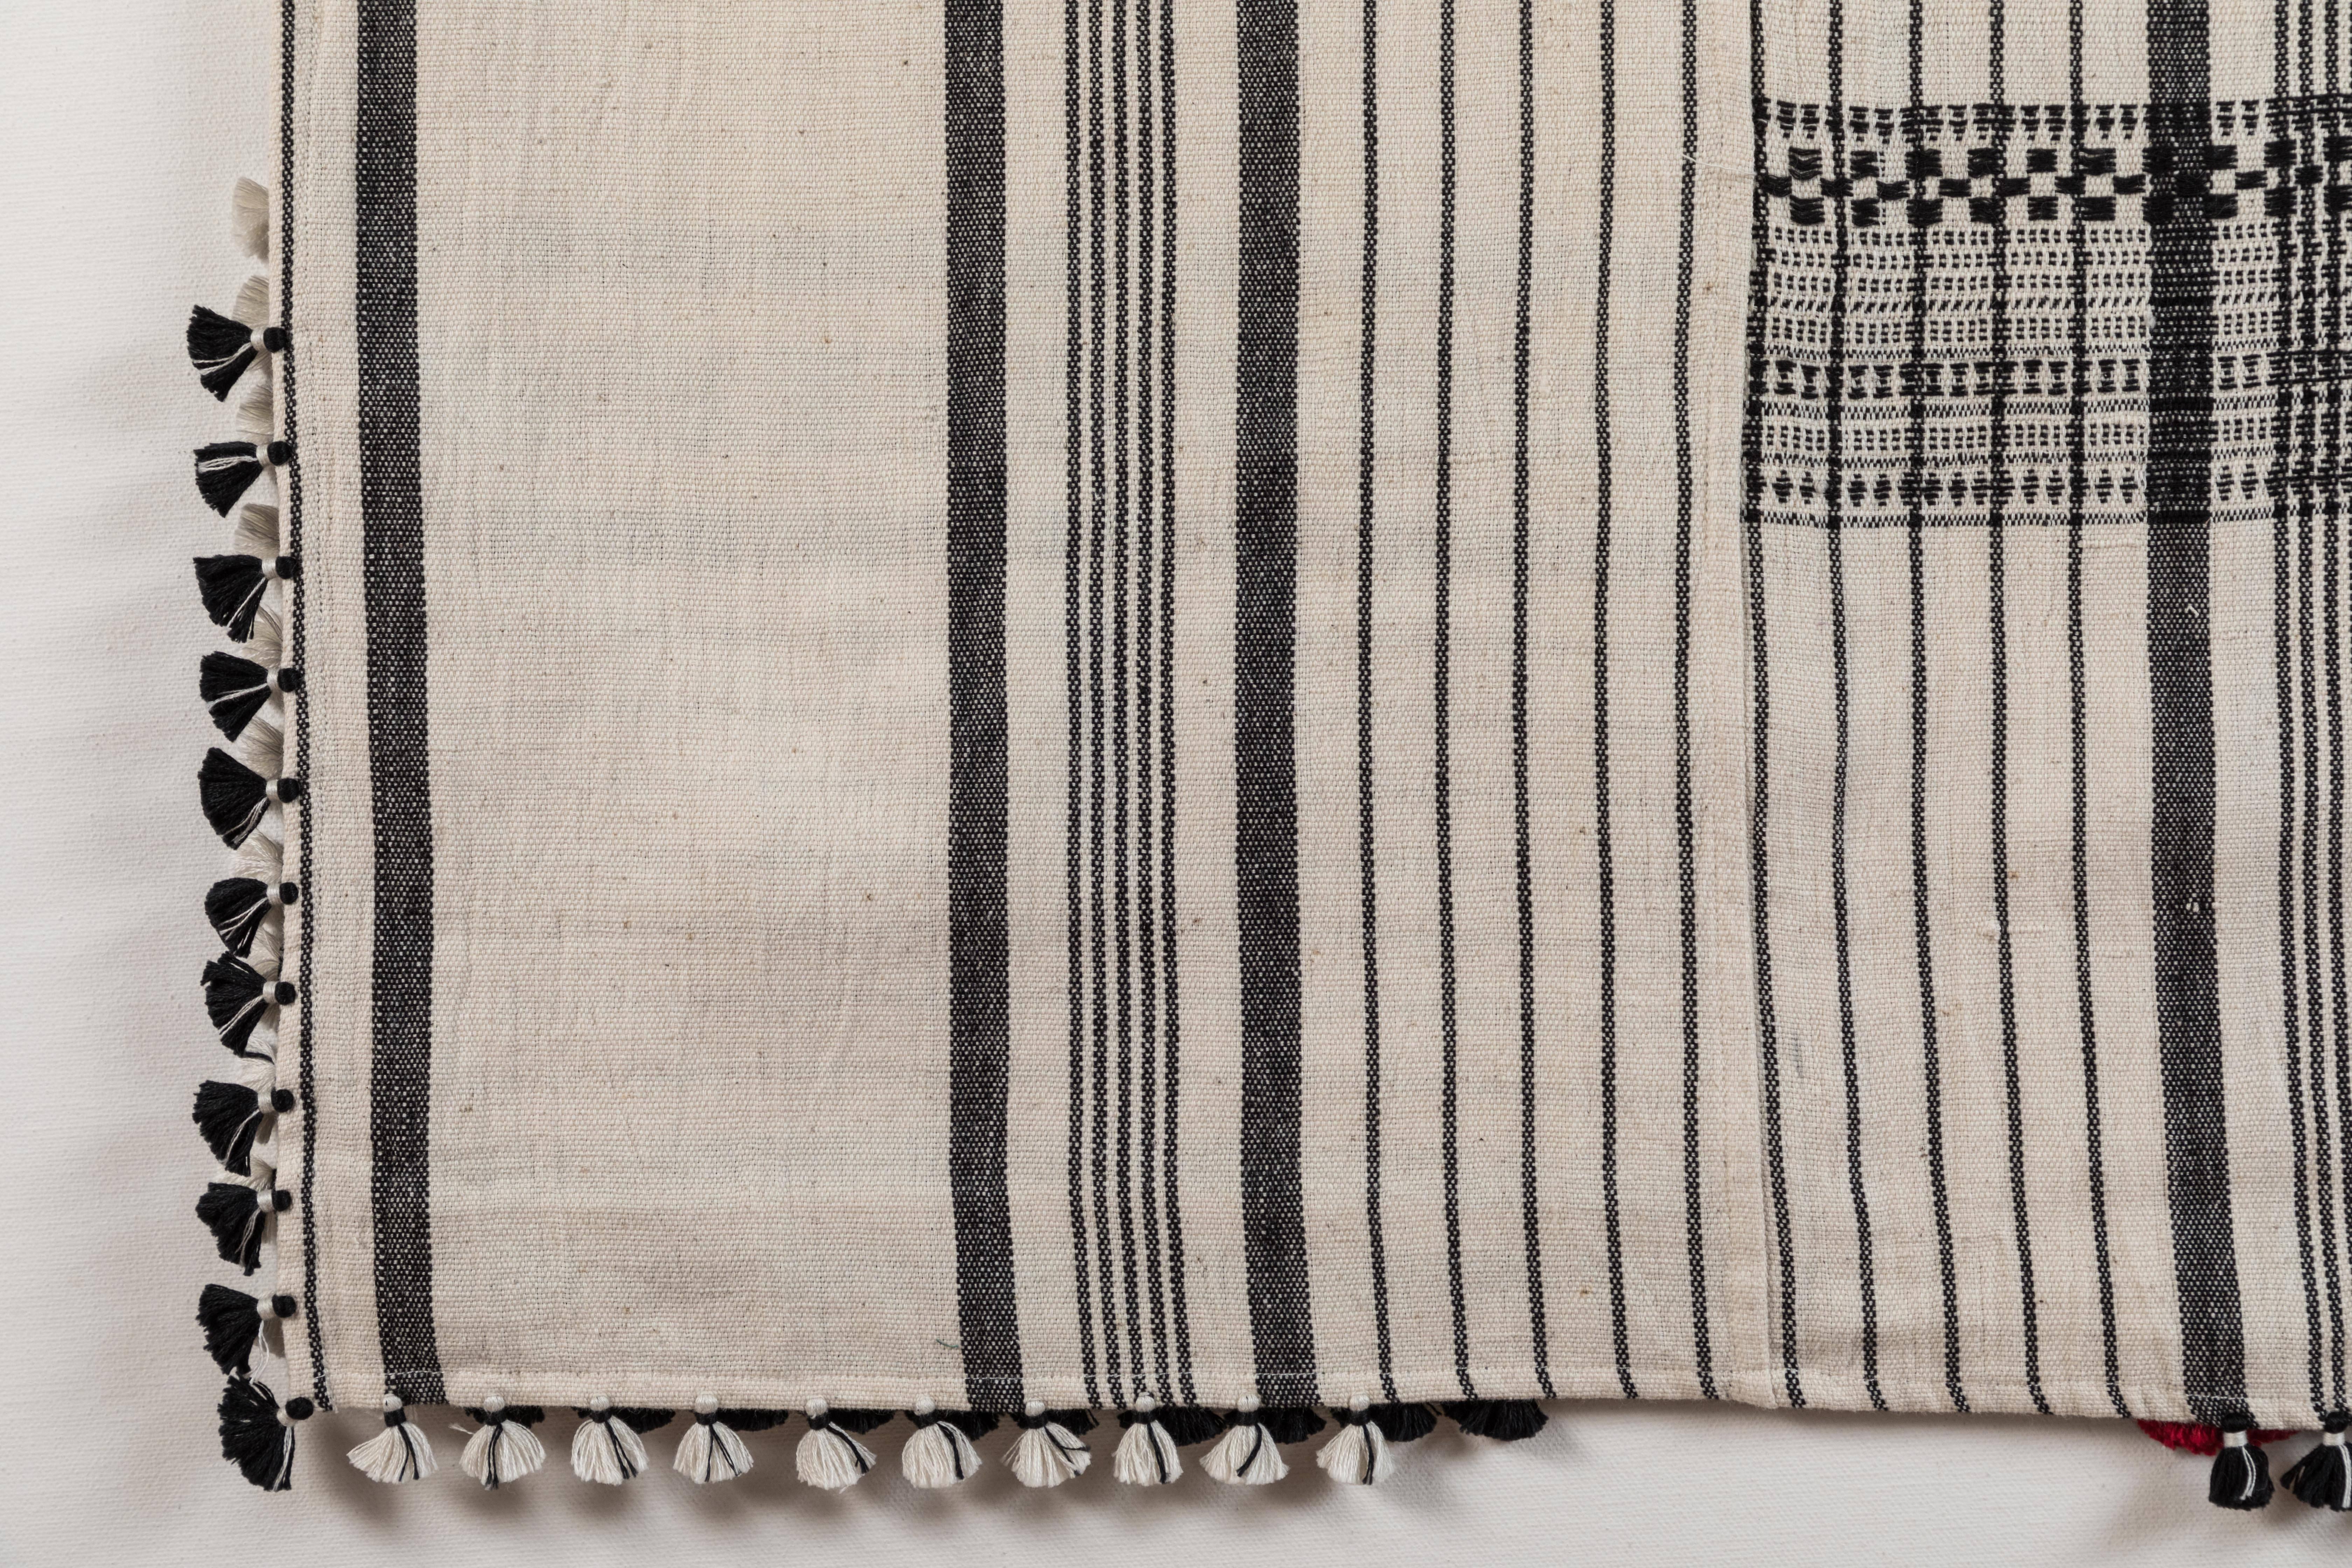 Kala naturally dyed organic cotton from Gujarat, India.  Hand-loomed using traditional Indian textile techniques to produce extra weft woven stripes and plaids.  This black and white bedcover/throw has added hand-knotted tassels. Åreas of hand